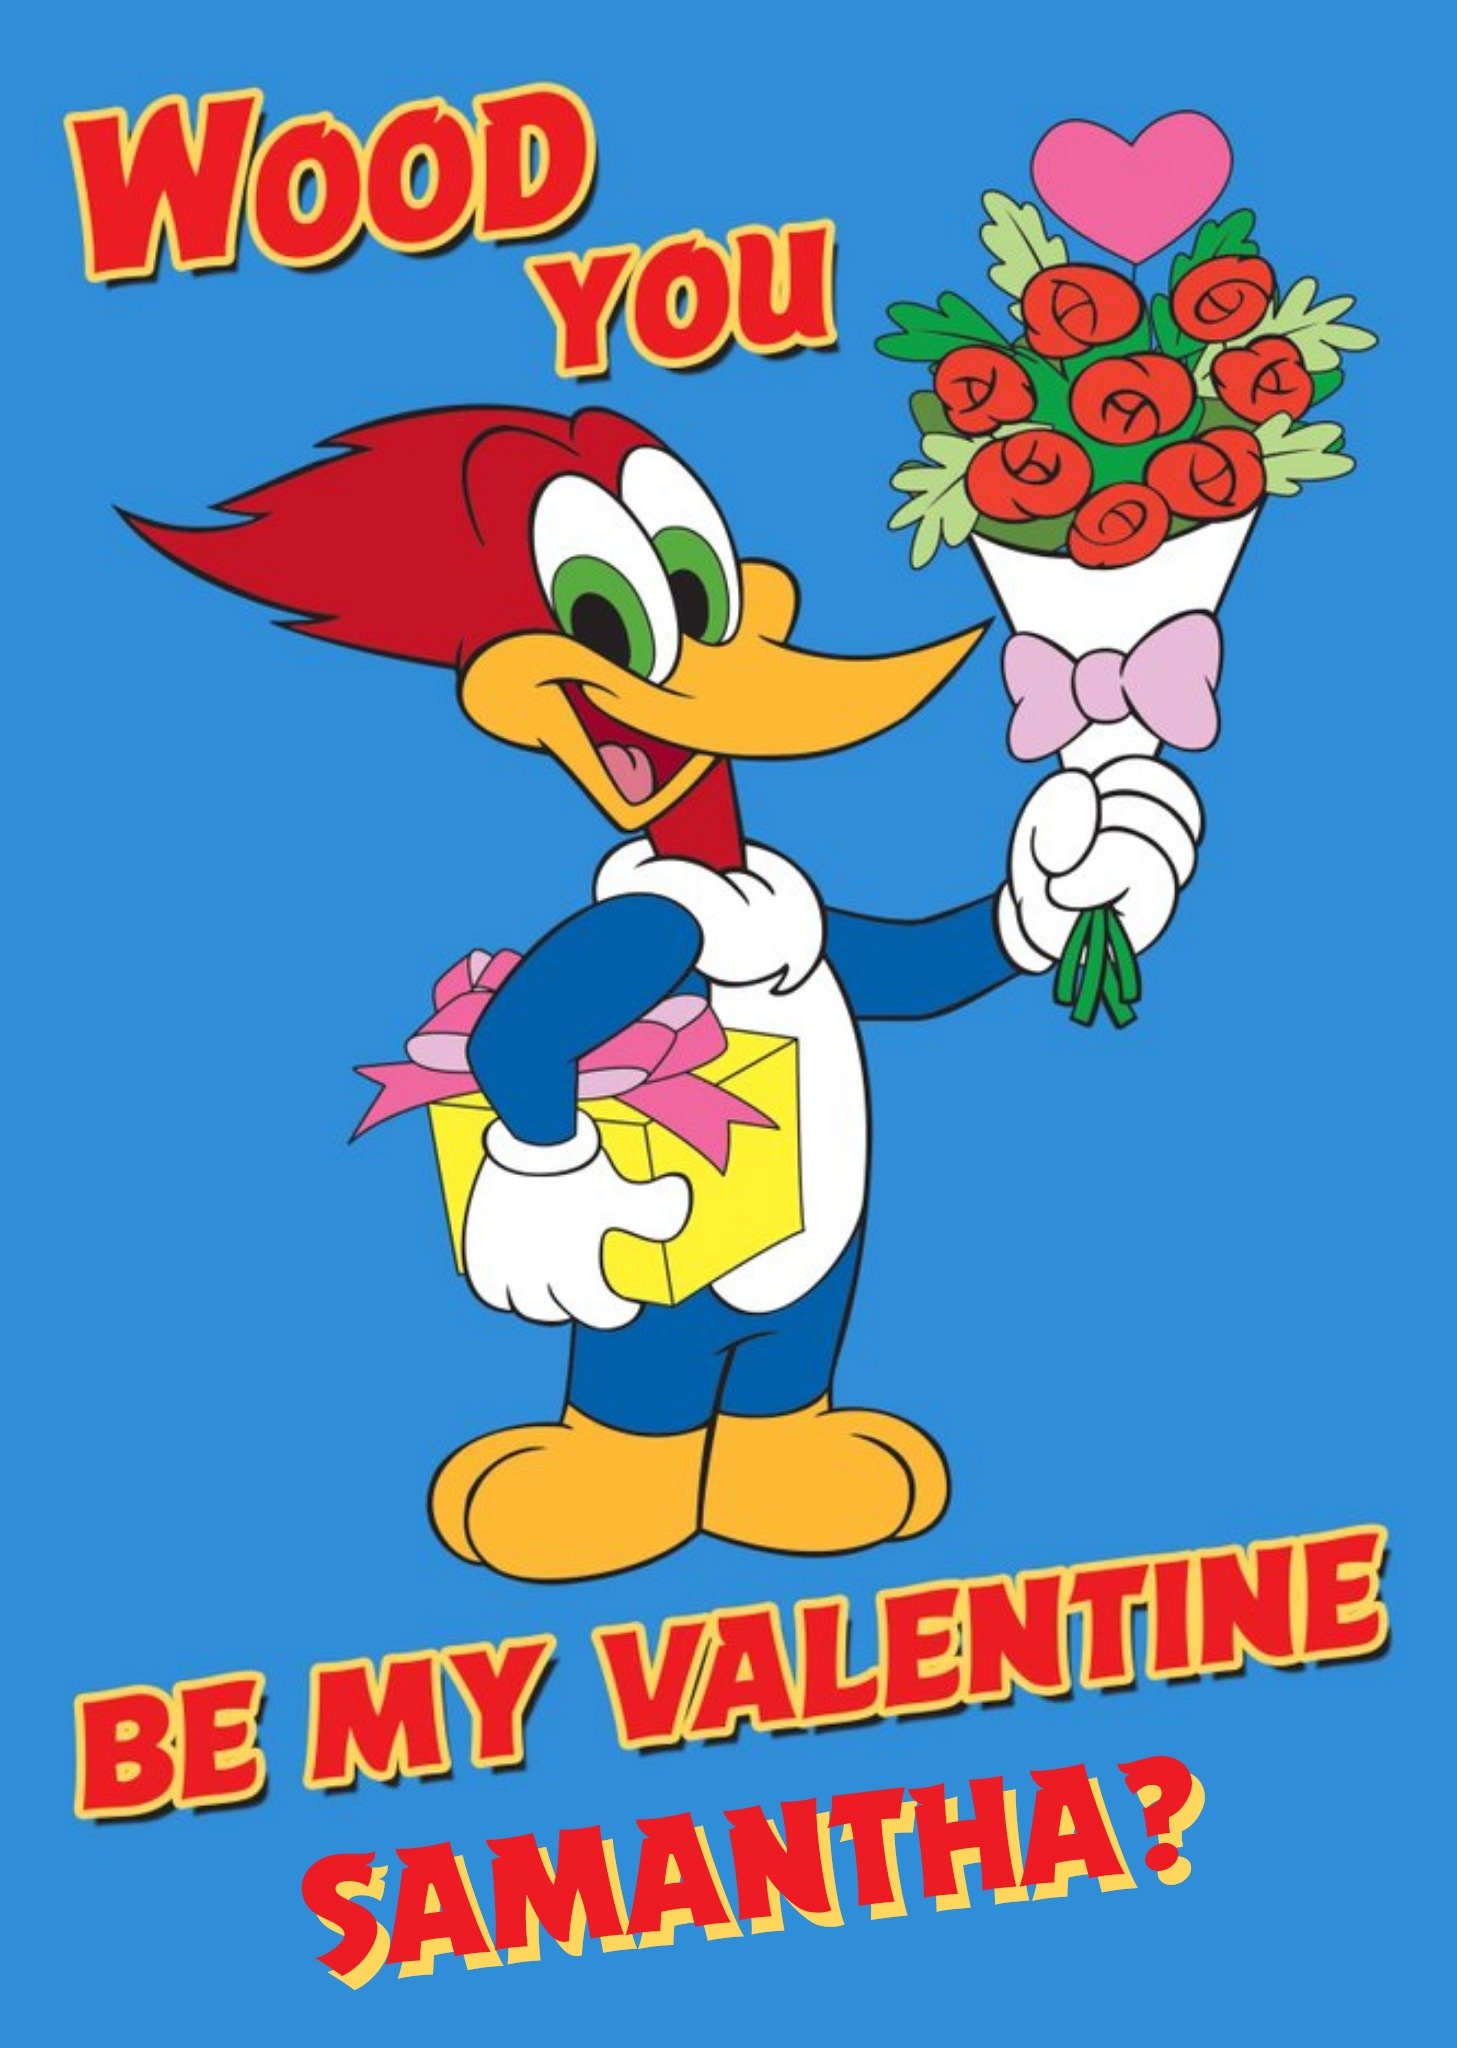 Other Universal Woody Woodpecker Wood You Be My Valentine Funny Pun Card, Large